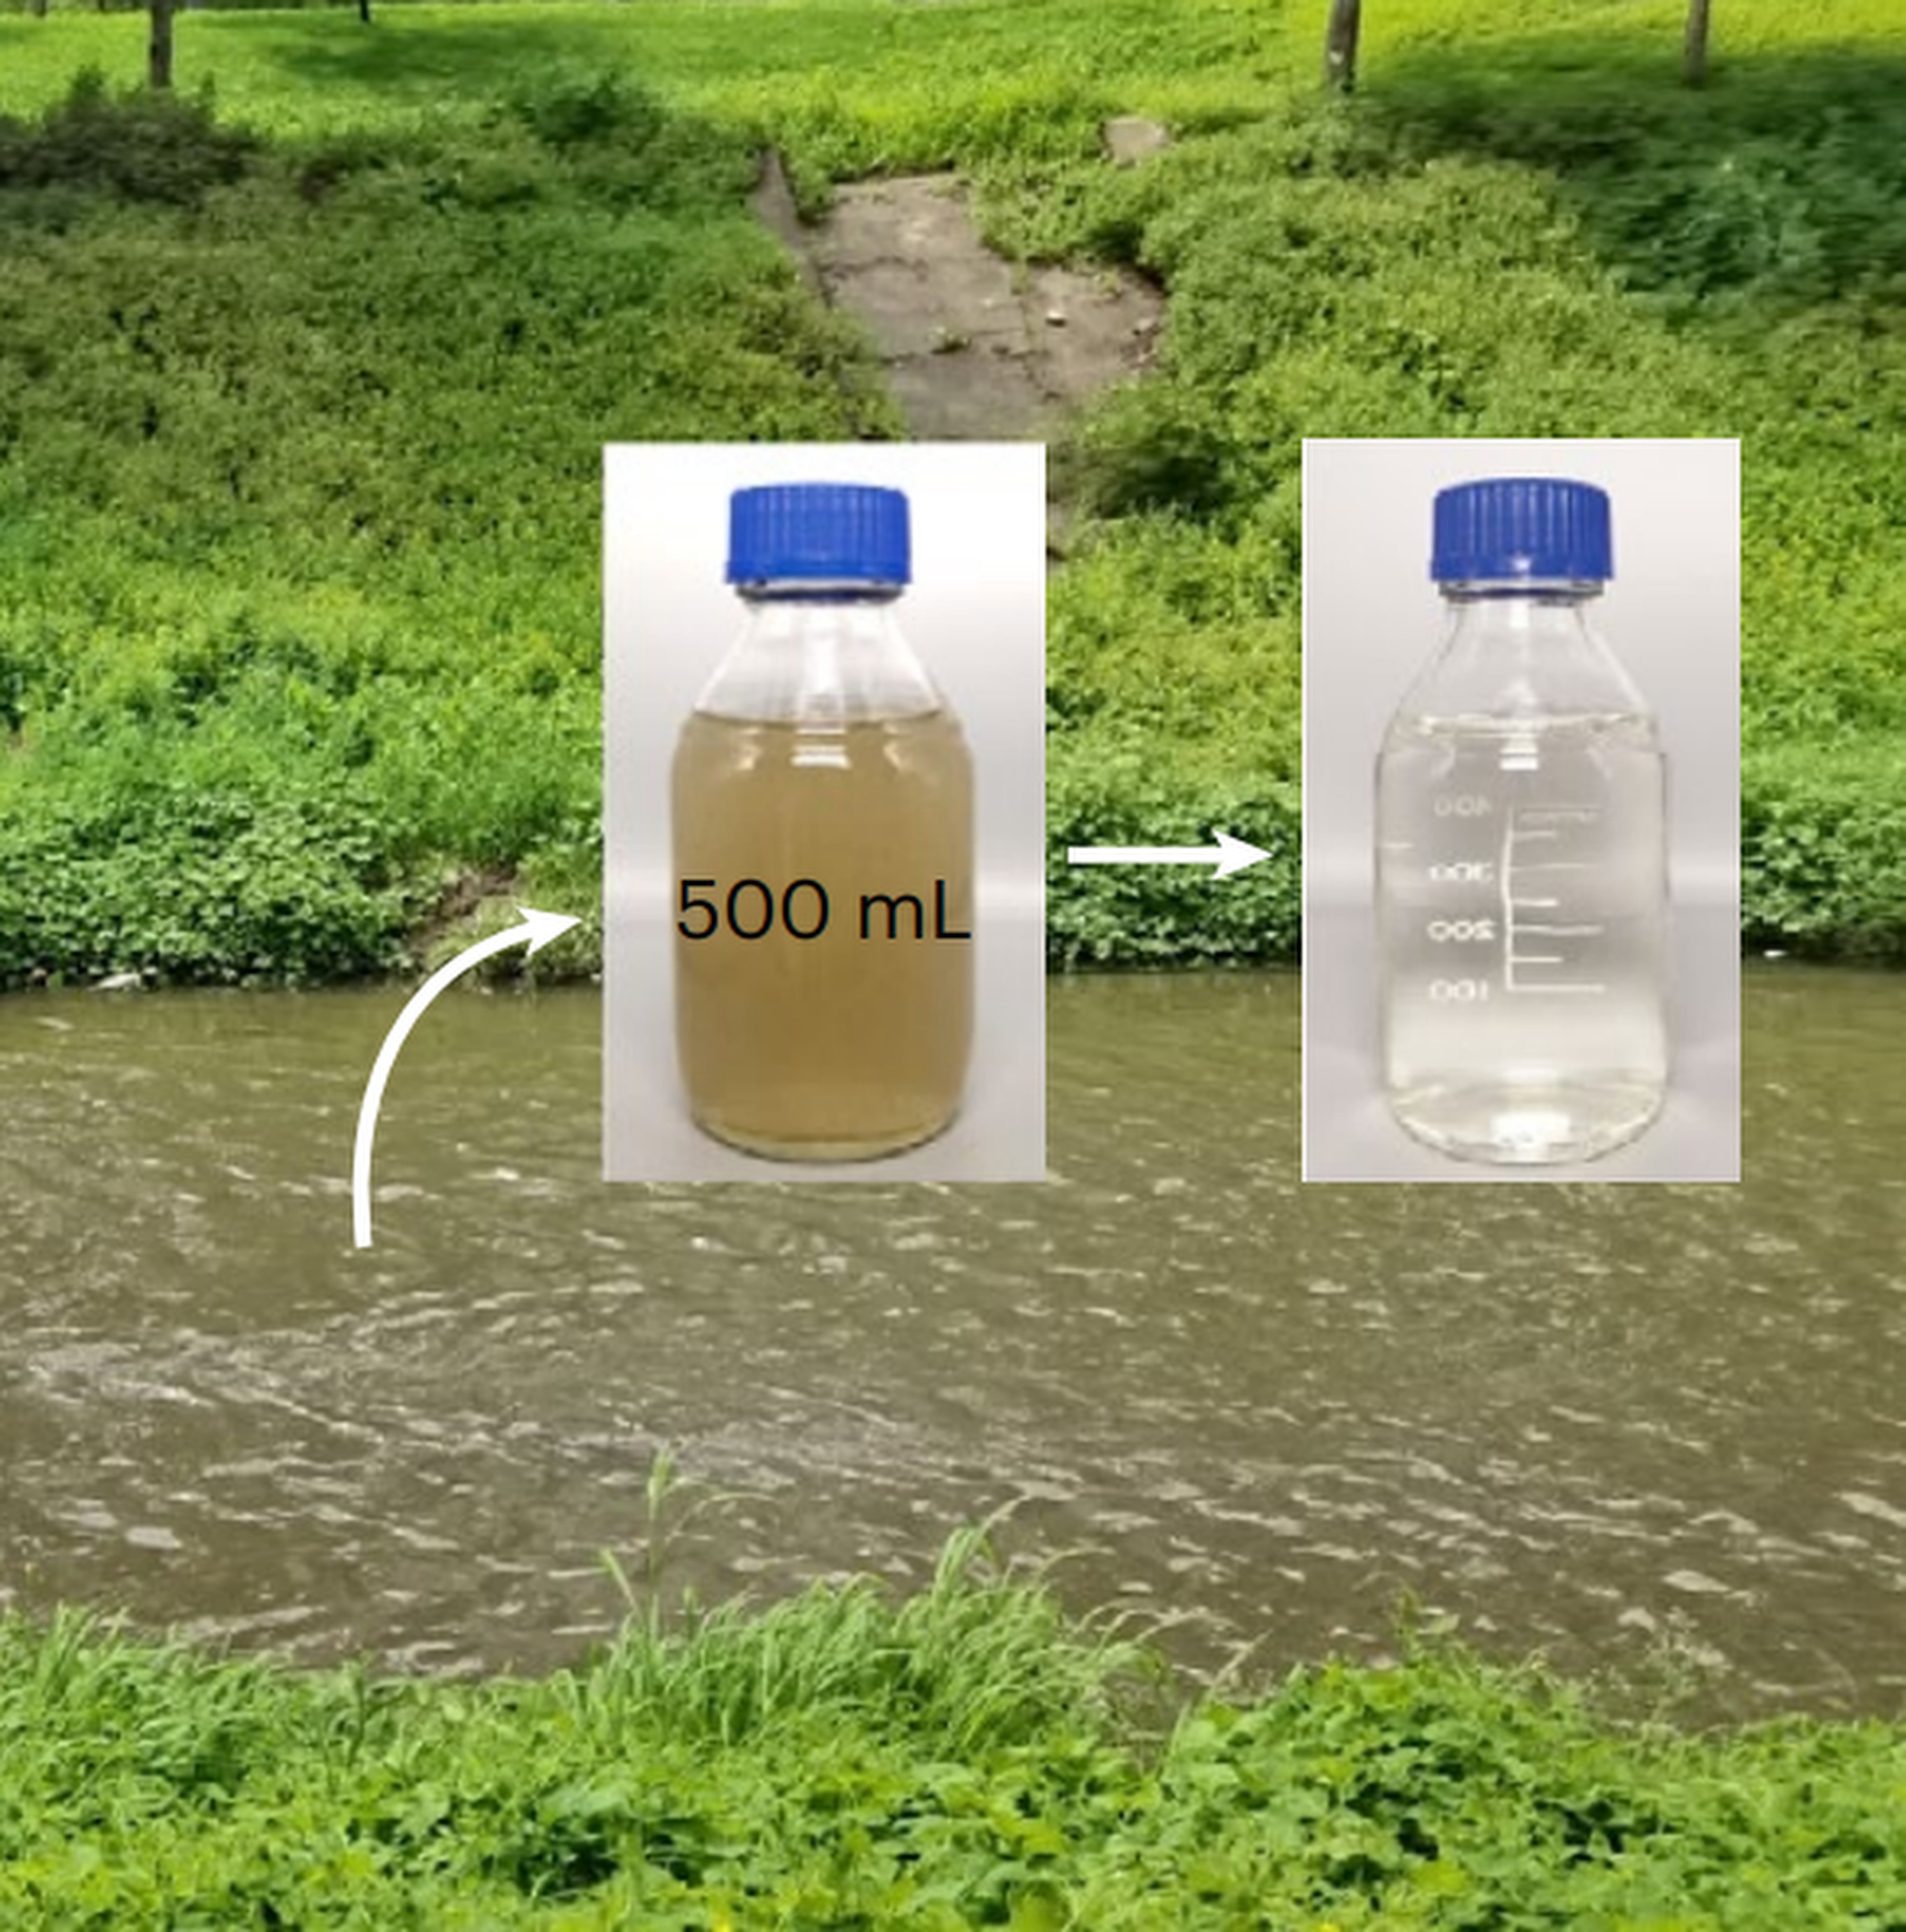 A joint US-Chinese research team has devised a system that converts dirty water into clean water seven faster than other filtrations systems currently available. Photo: Handout